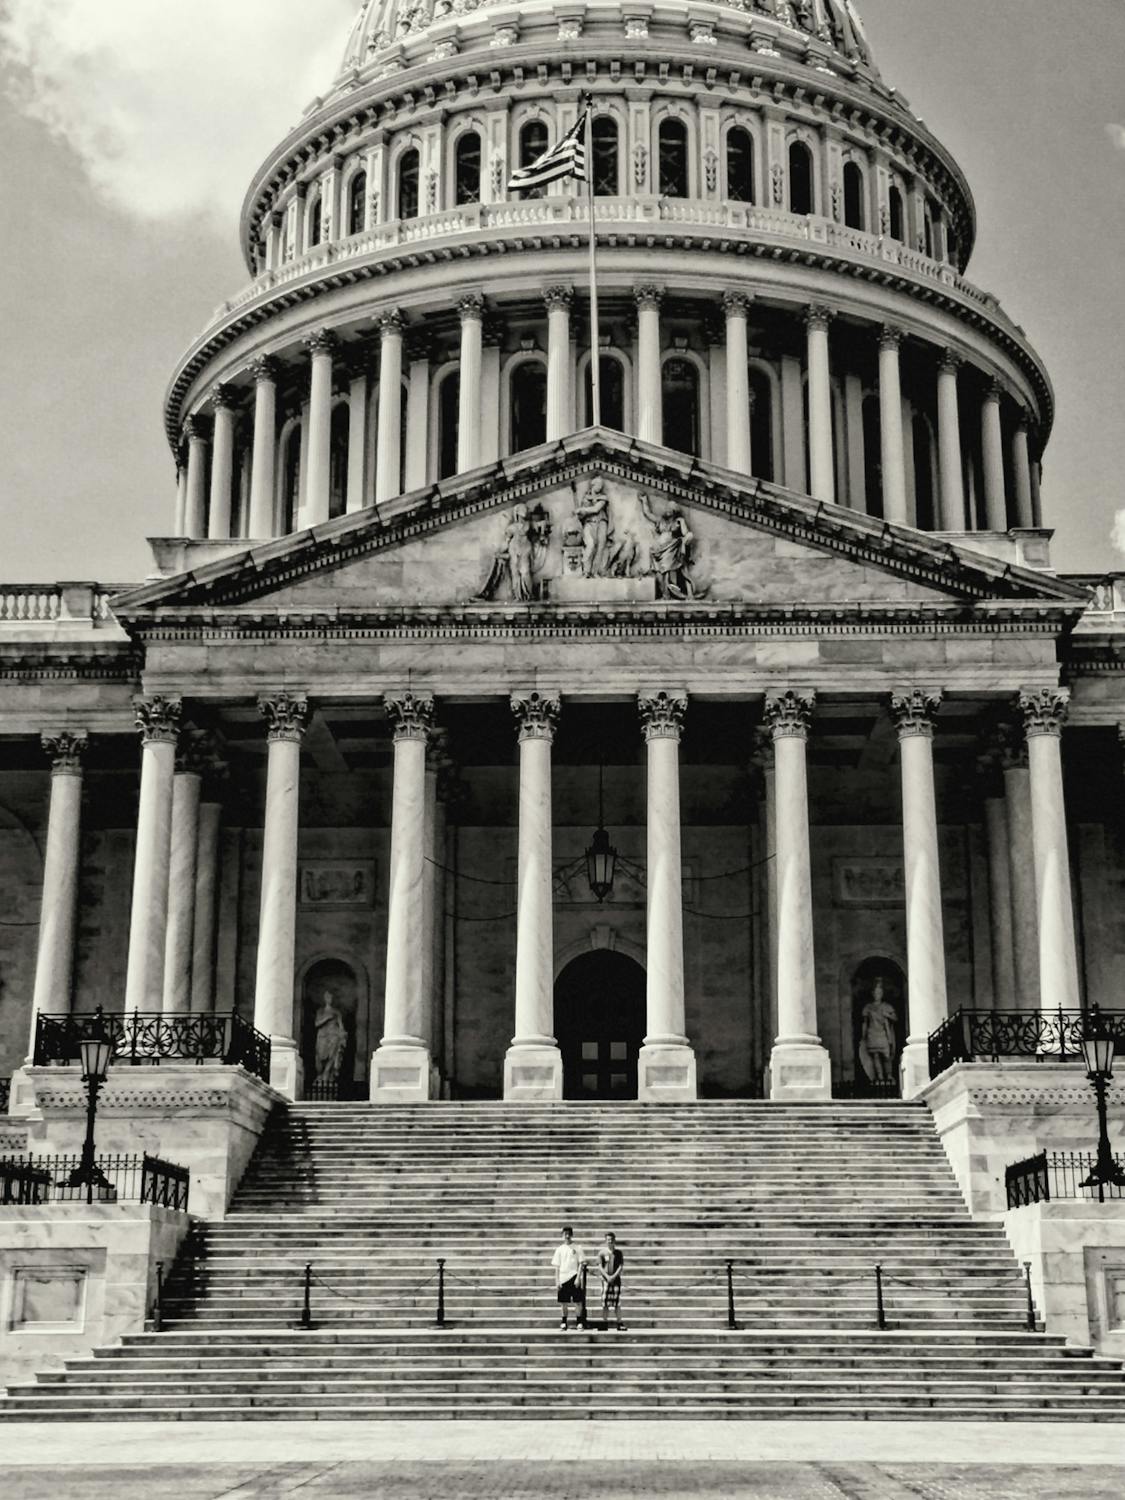 Facade Of Usa Capitol With Columns And Staircase · Free Stock Photo